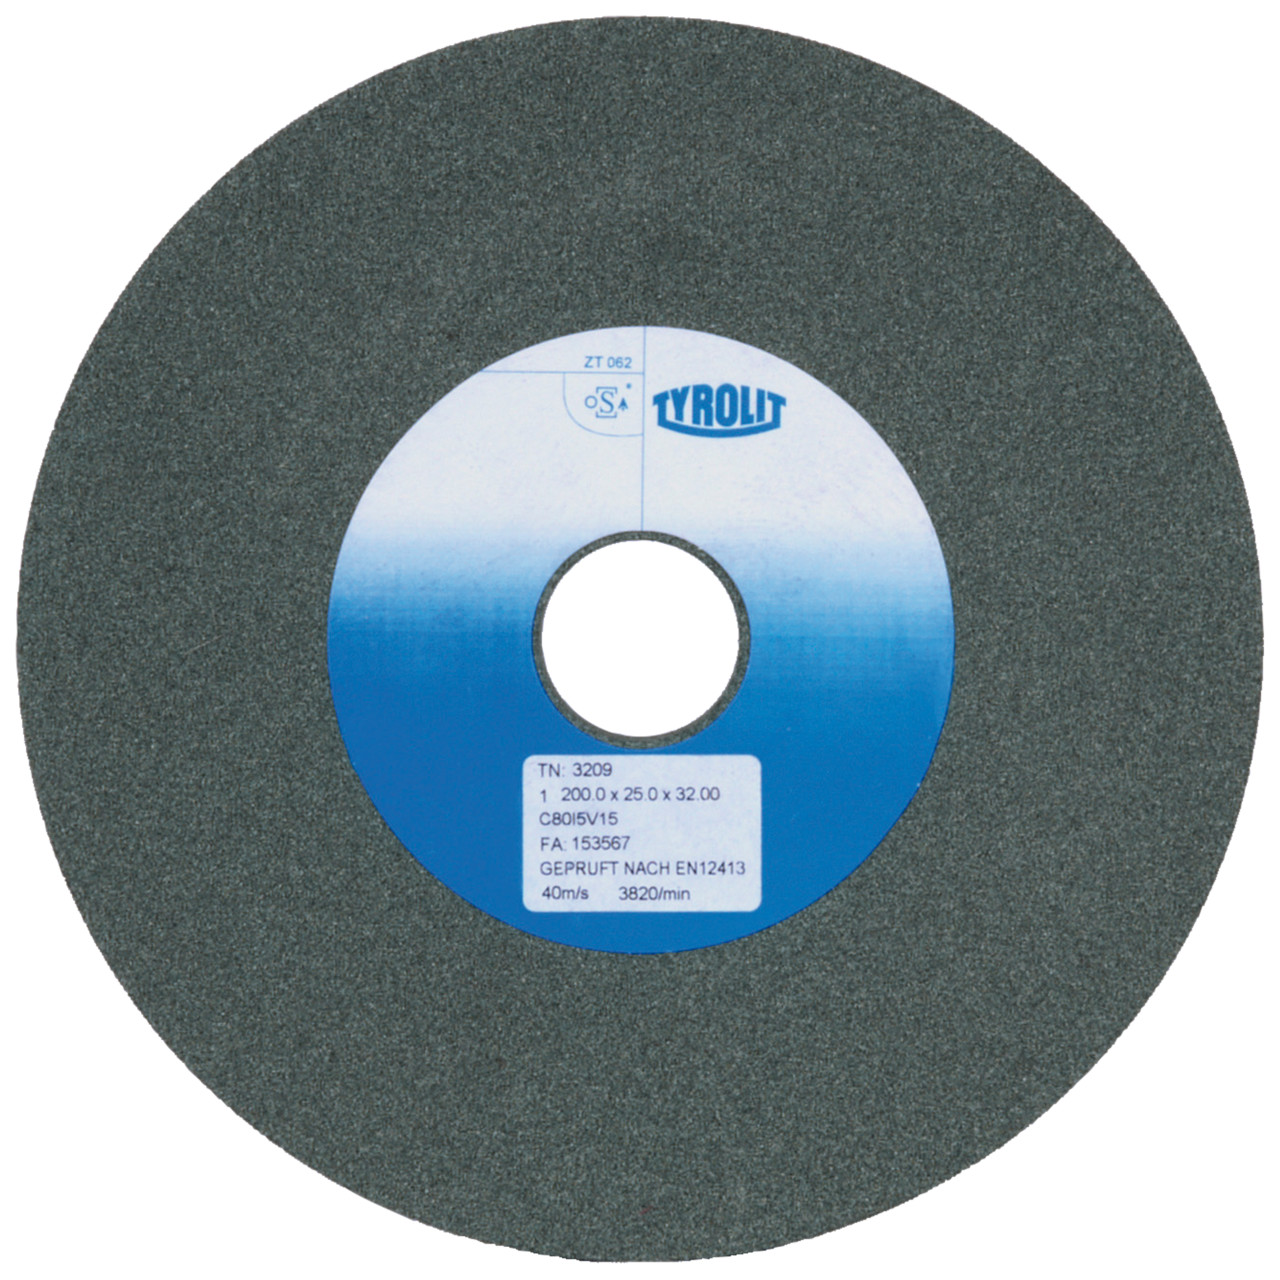 Tyrolit Conventional ceramic grinding discs DxDxH 150x20x32 For carbide and cast iron, shape: 1, Art. 146906